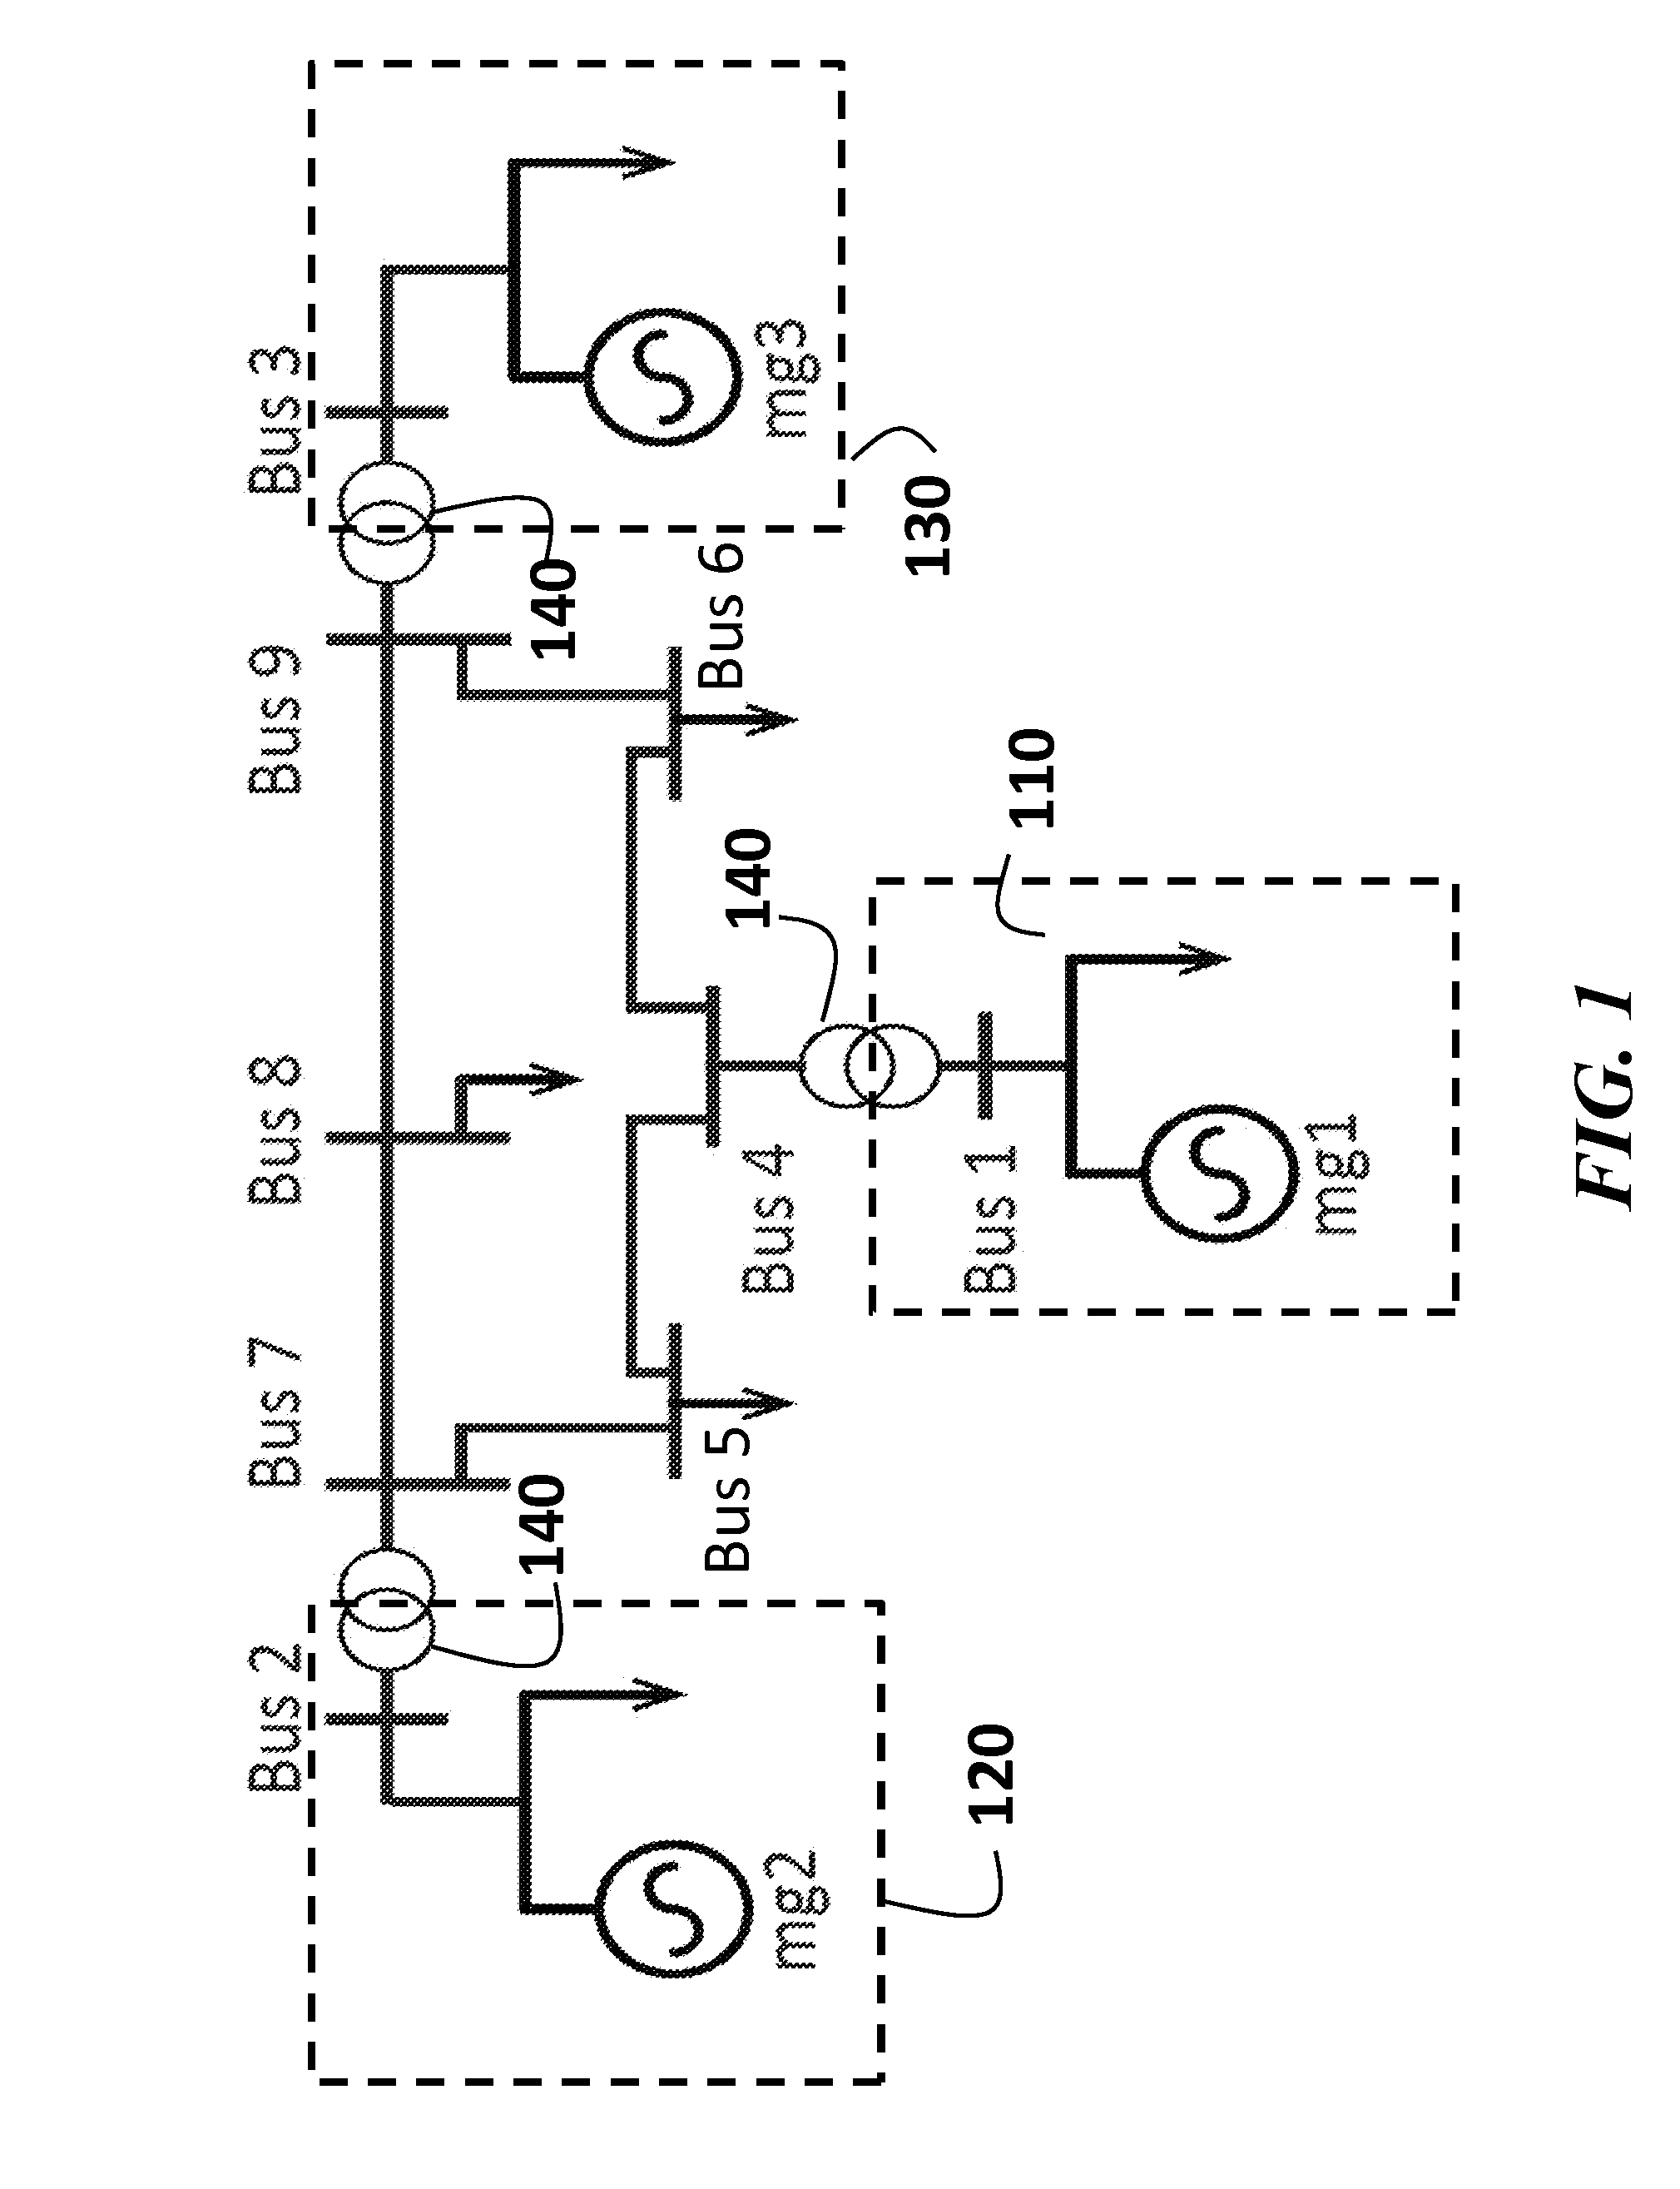 Method for Predicting a Voltage Collapse in a Micro-Grid Connected to a Power Distribution Network